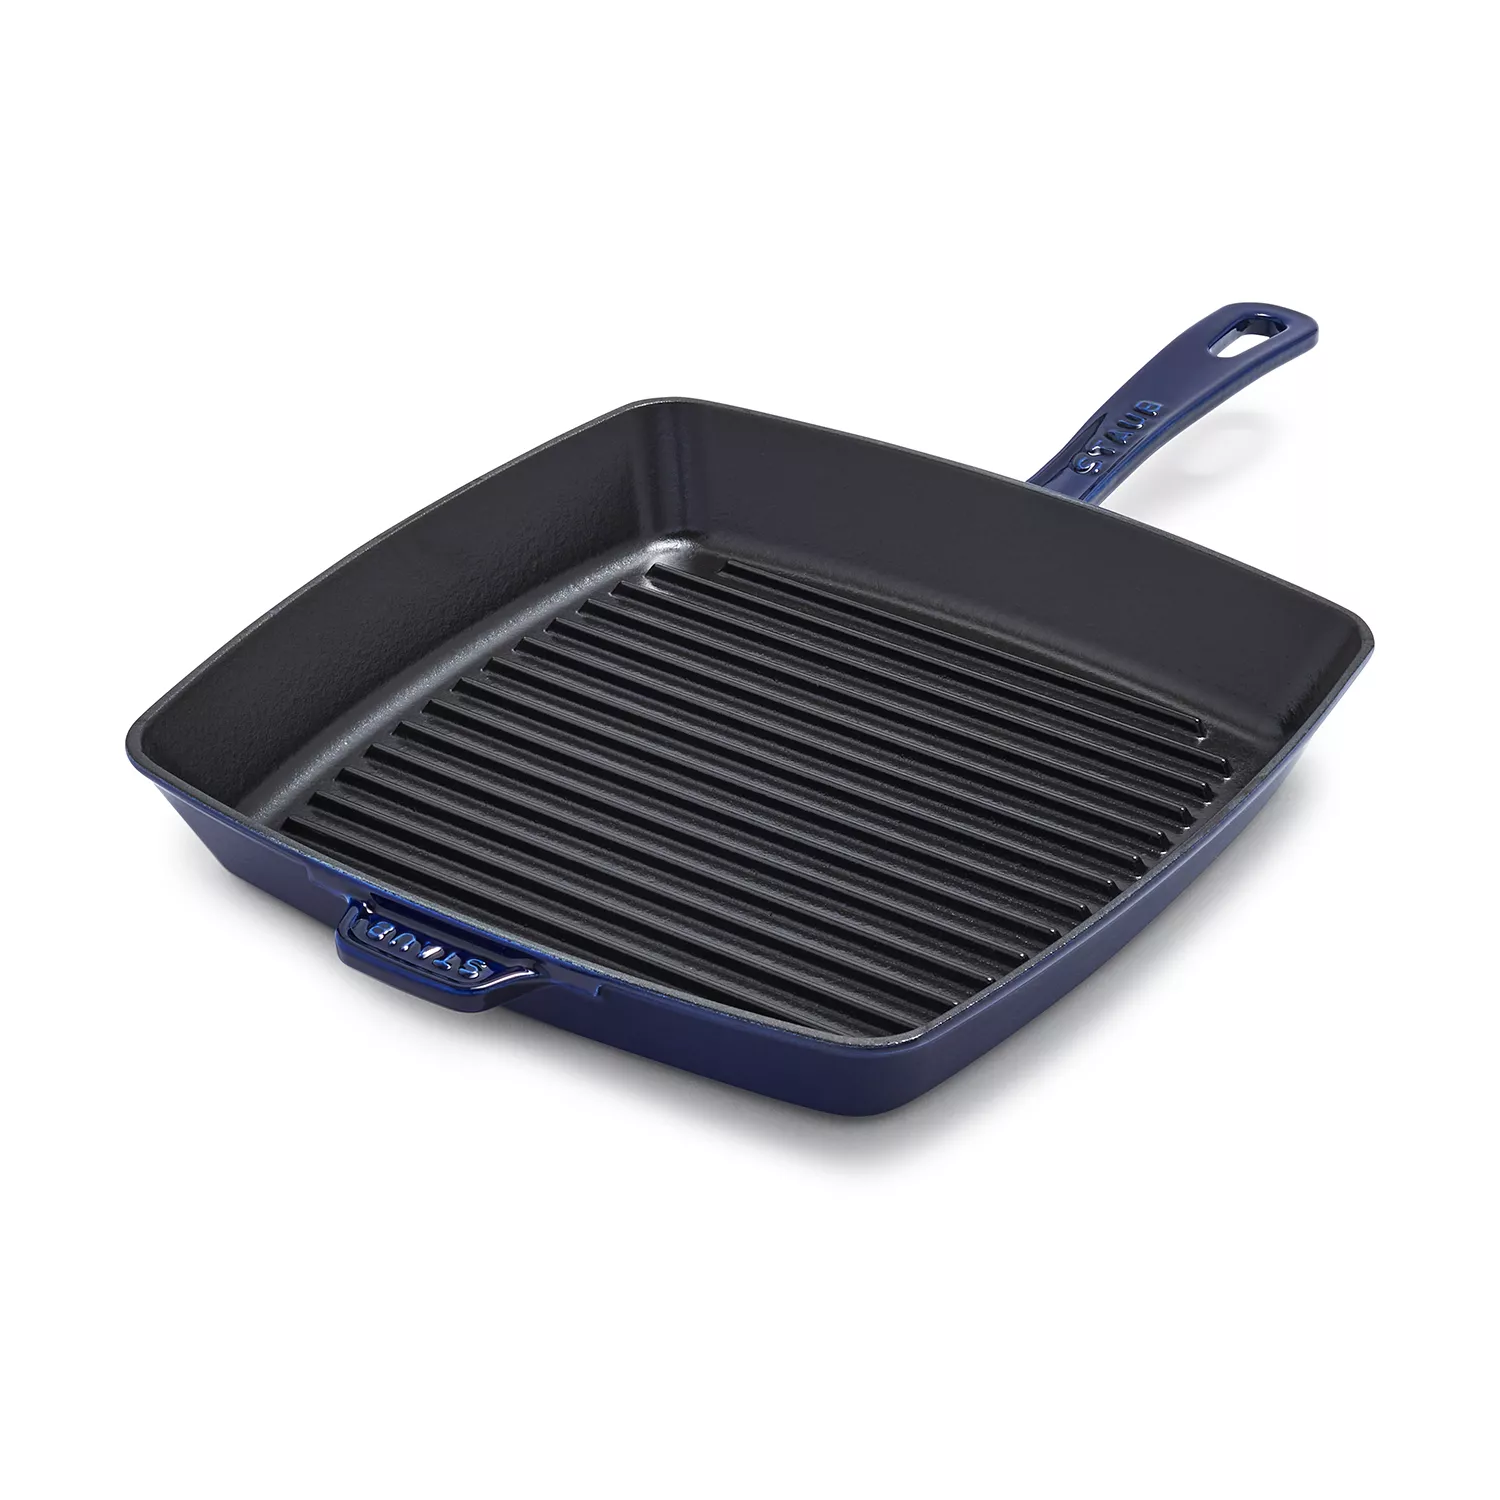 Staub grill pan/skillet 26 cm square, red  Advantageously shopping at